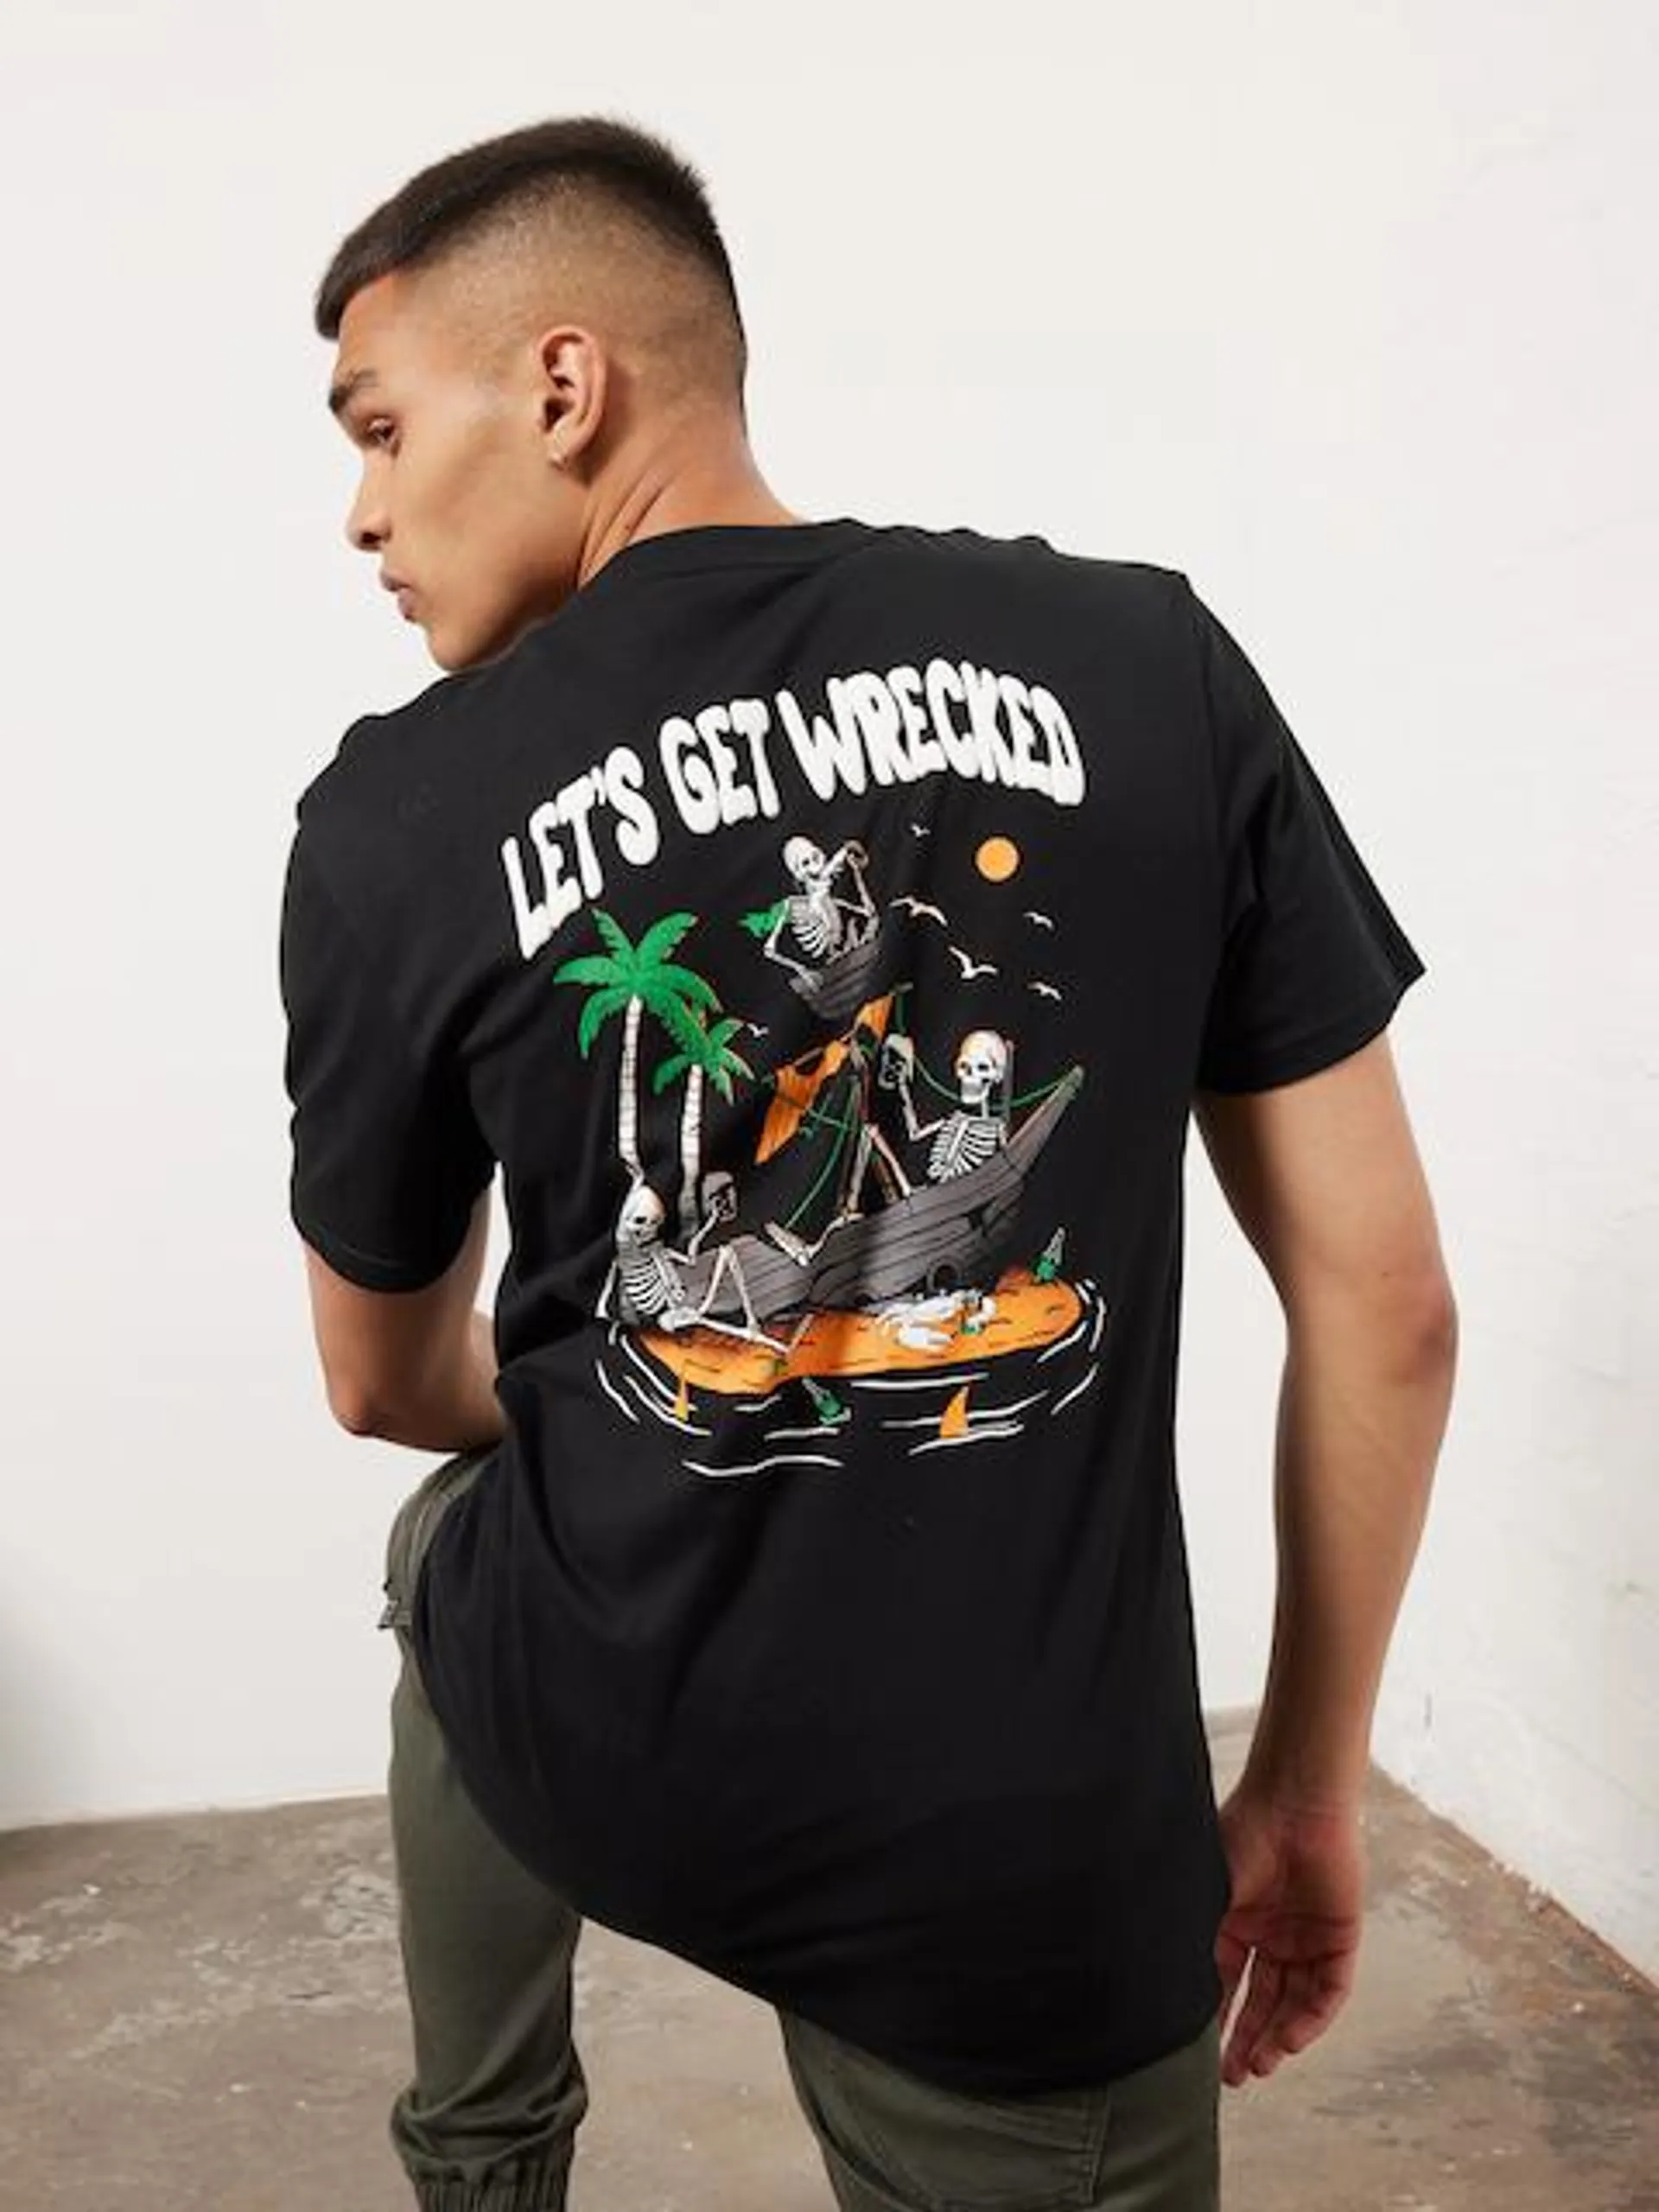 Surf Get Wrecked Tee